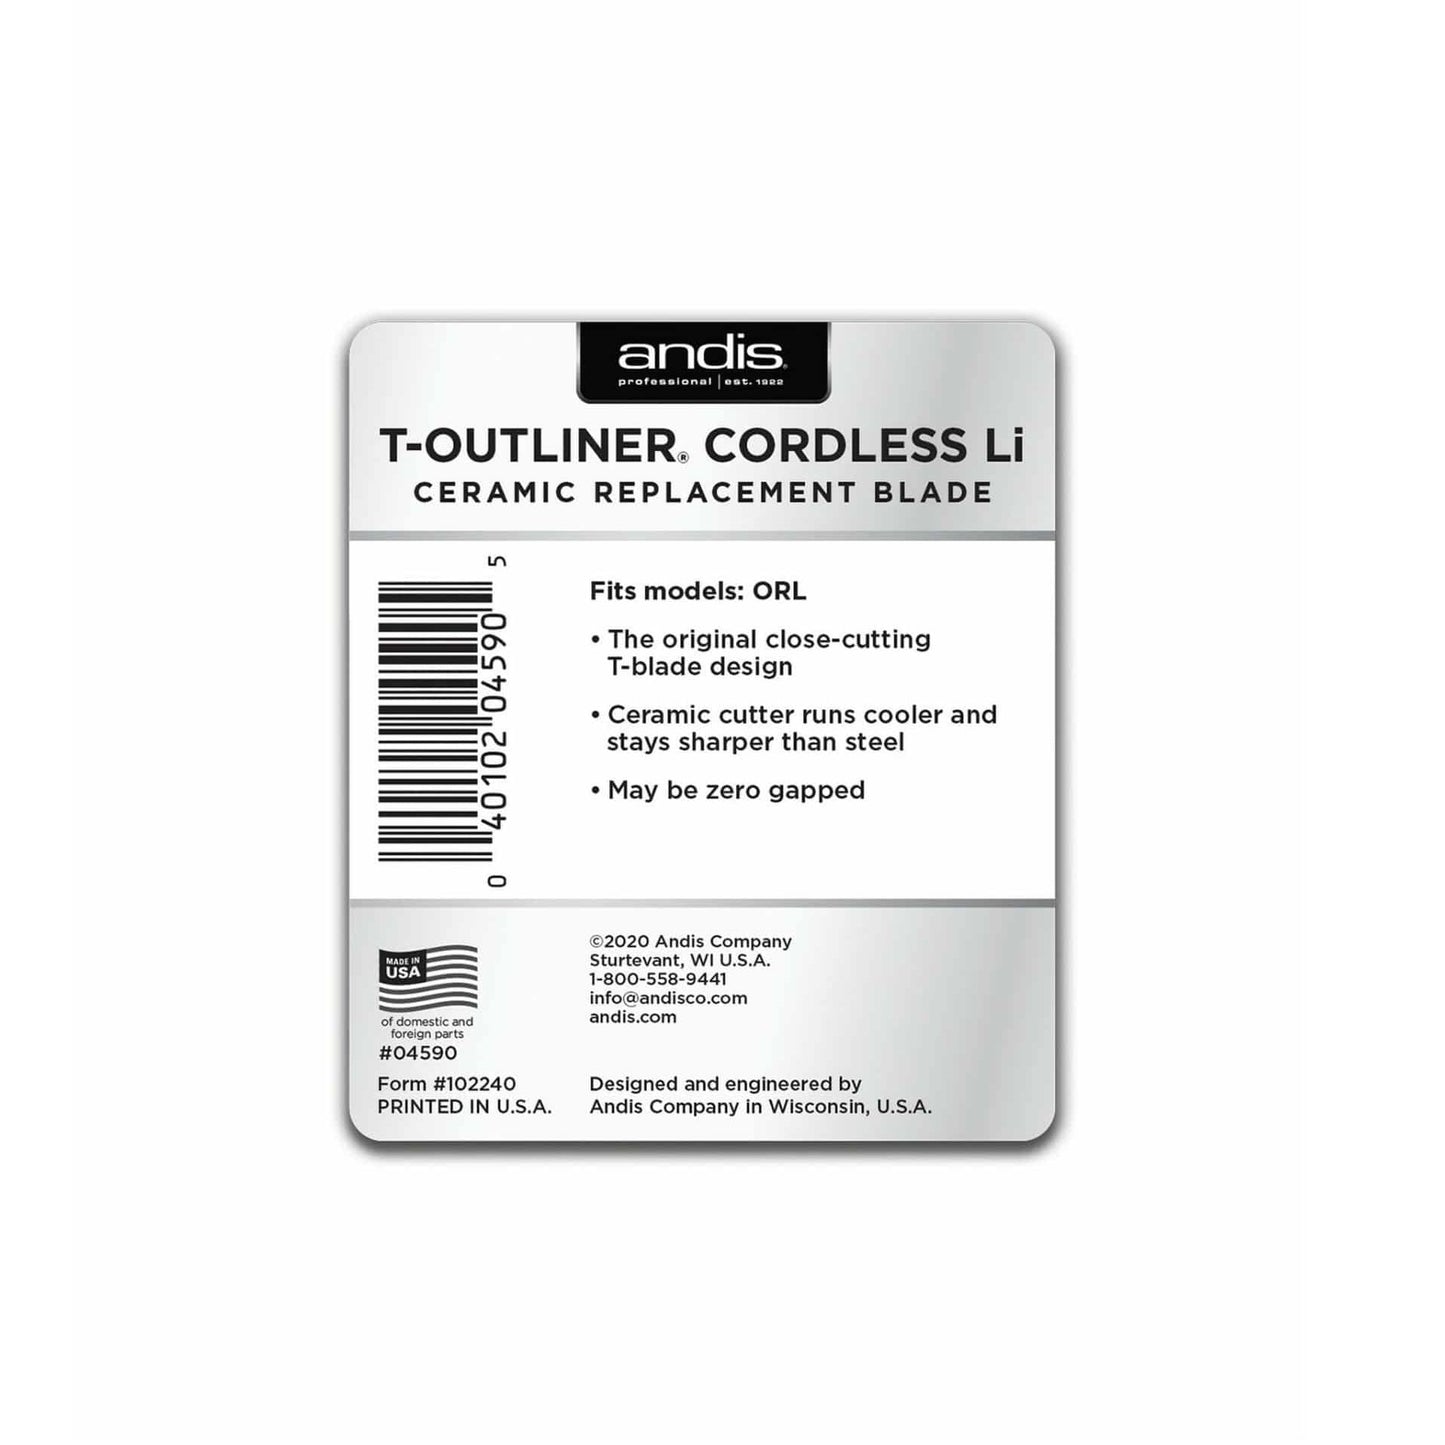 ANDIS T-OUTLINER LI CORDLESS CERAMIC REPLACEMENT BLADE #04590